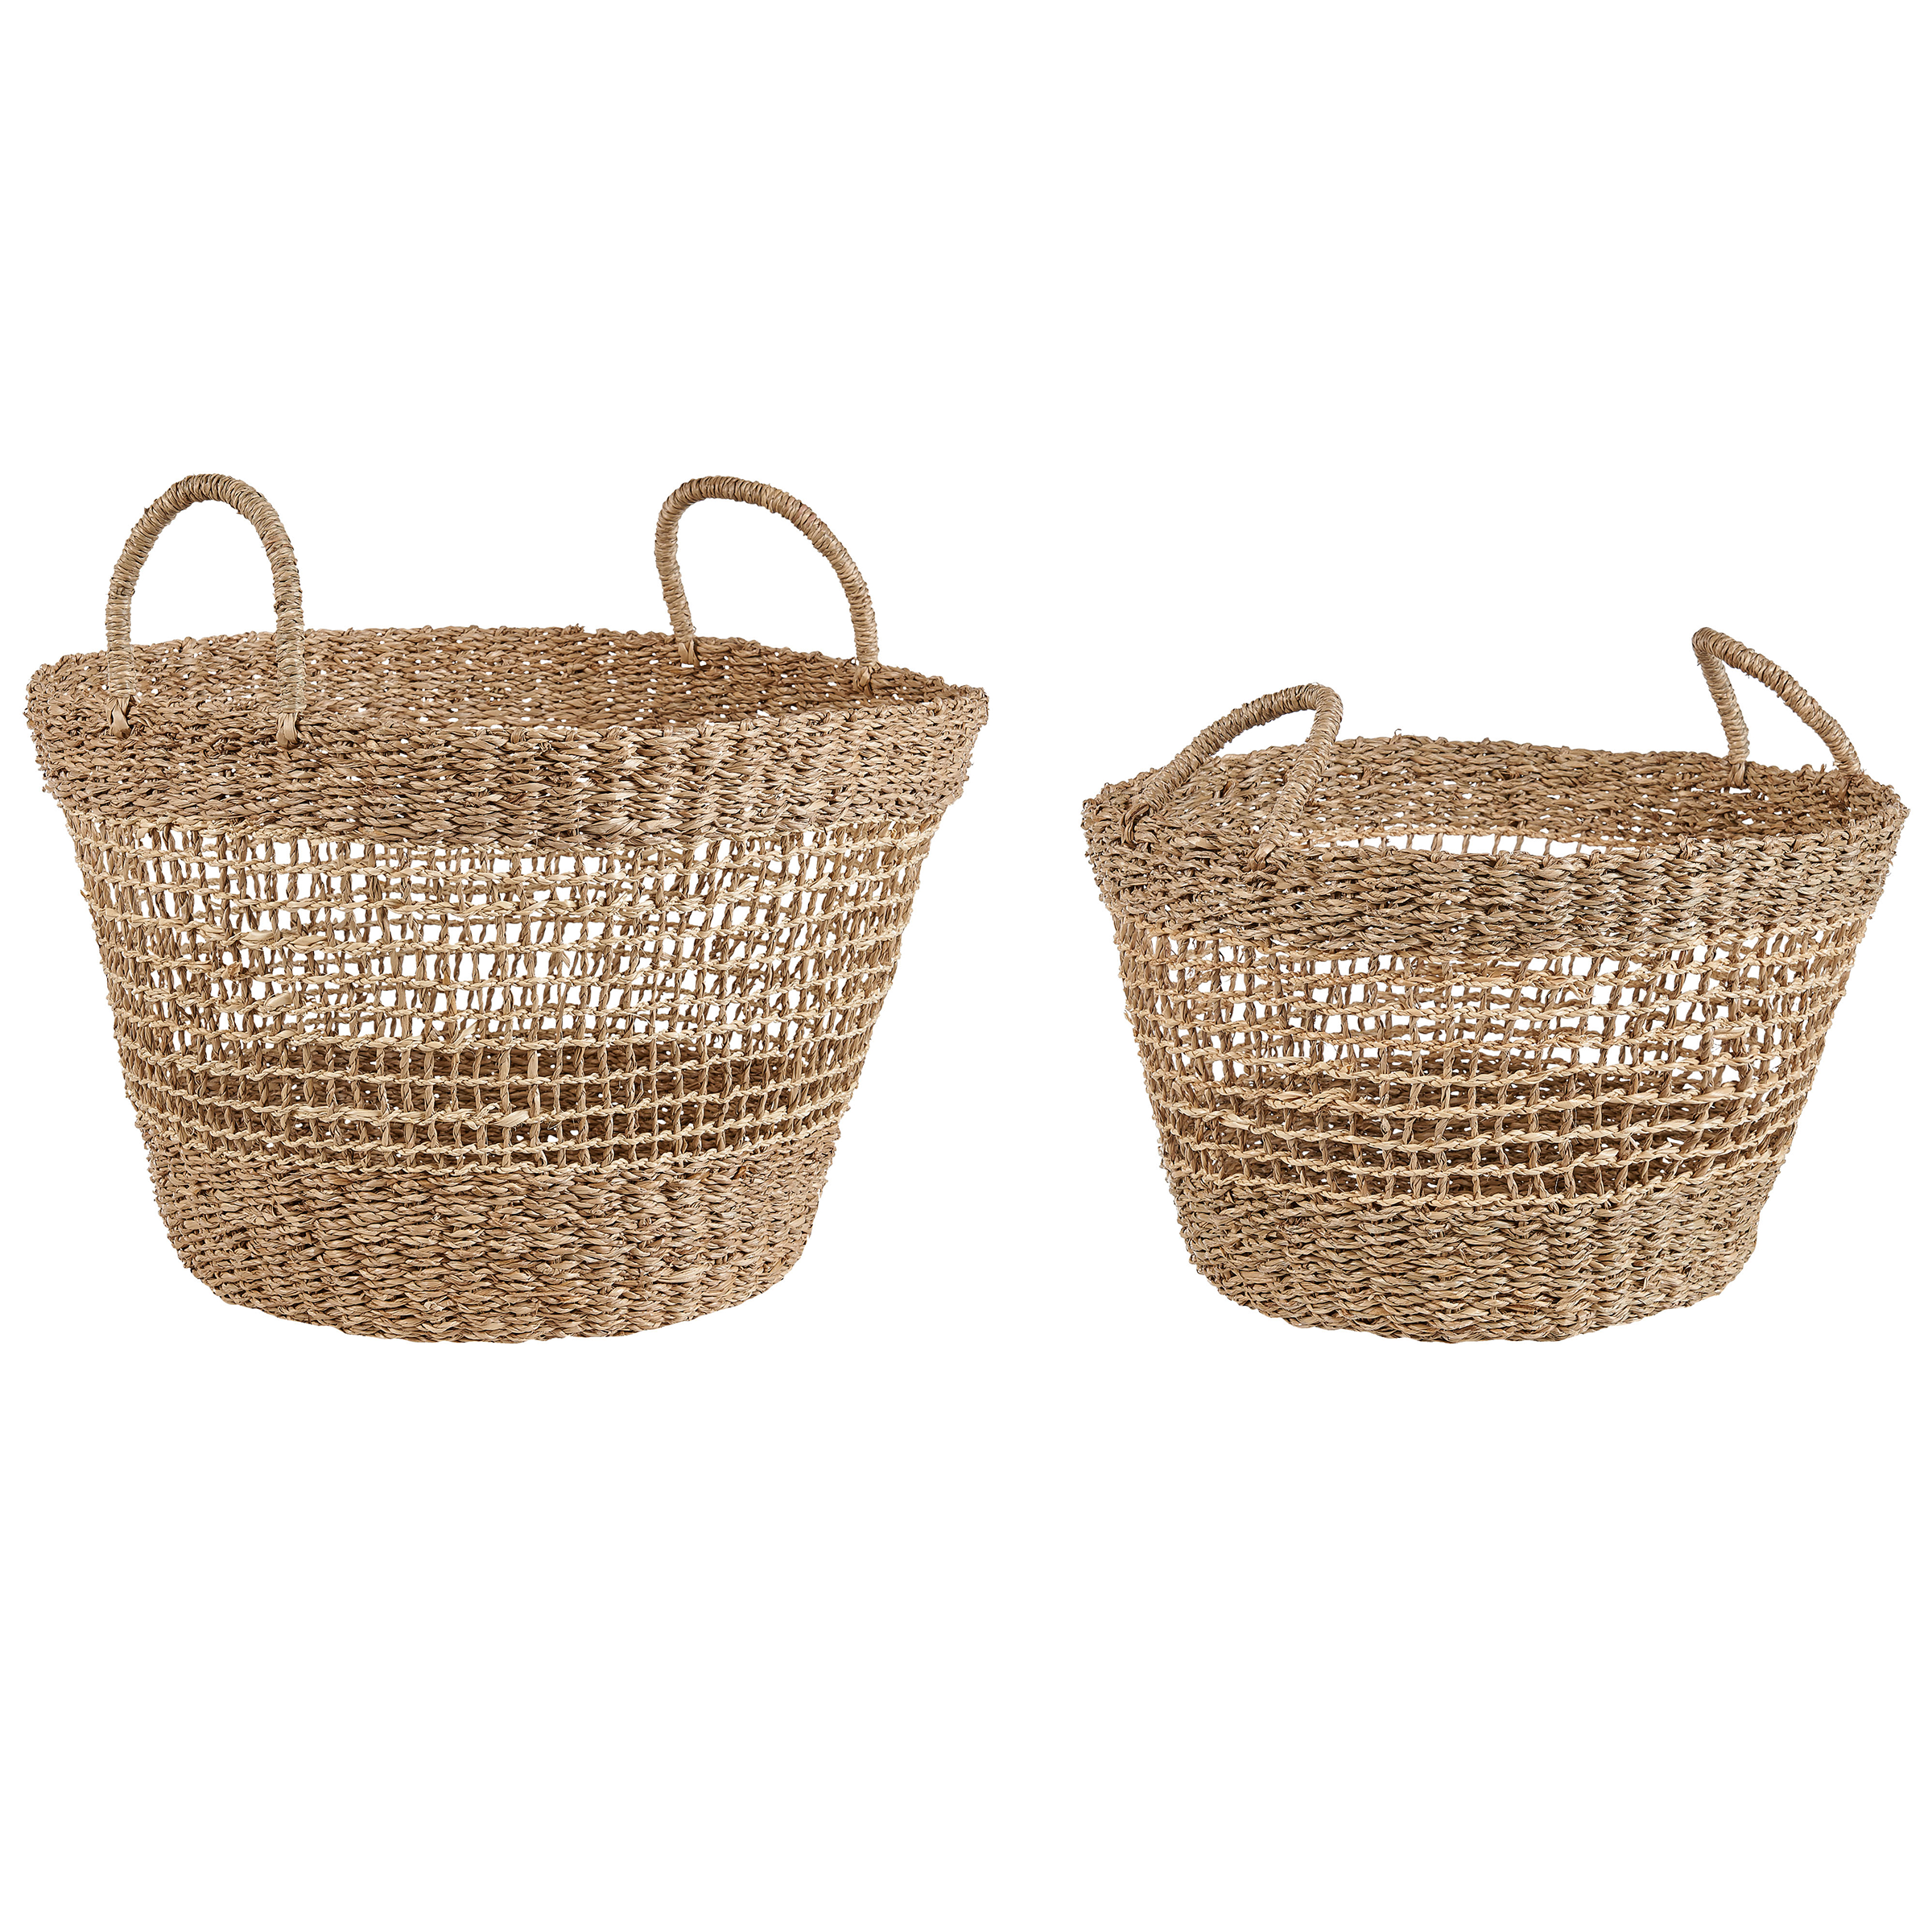 Beliani Set of 2 Baskets Natural Seagrass with Handles Woven Home Accessory Boho Style Material:Seagrass Size:50/40x30/27x50/40